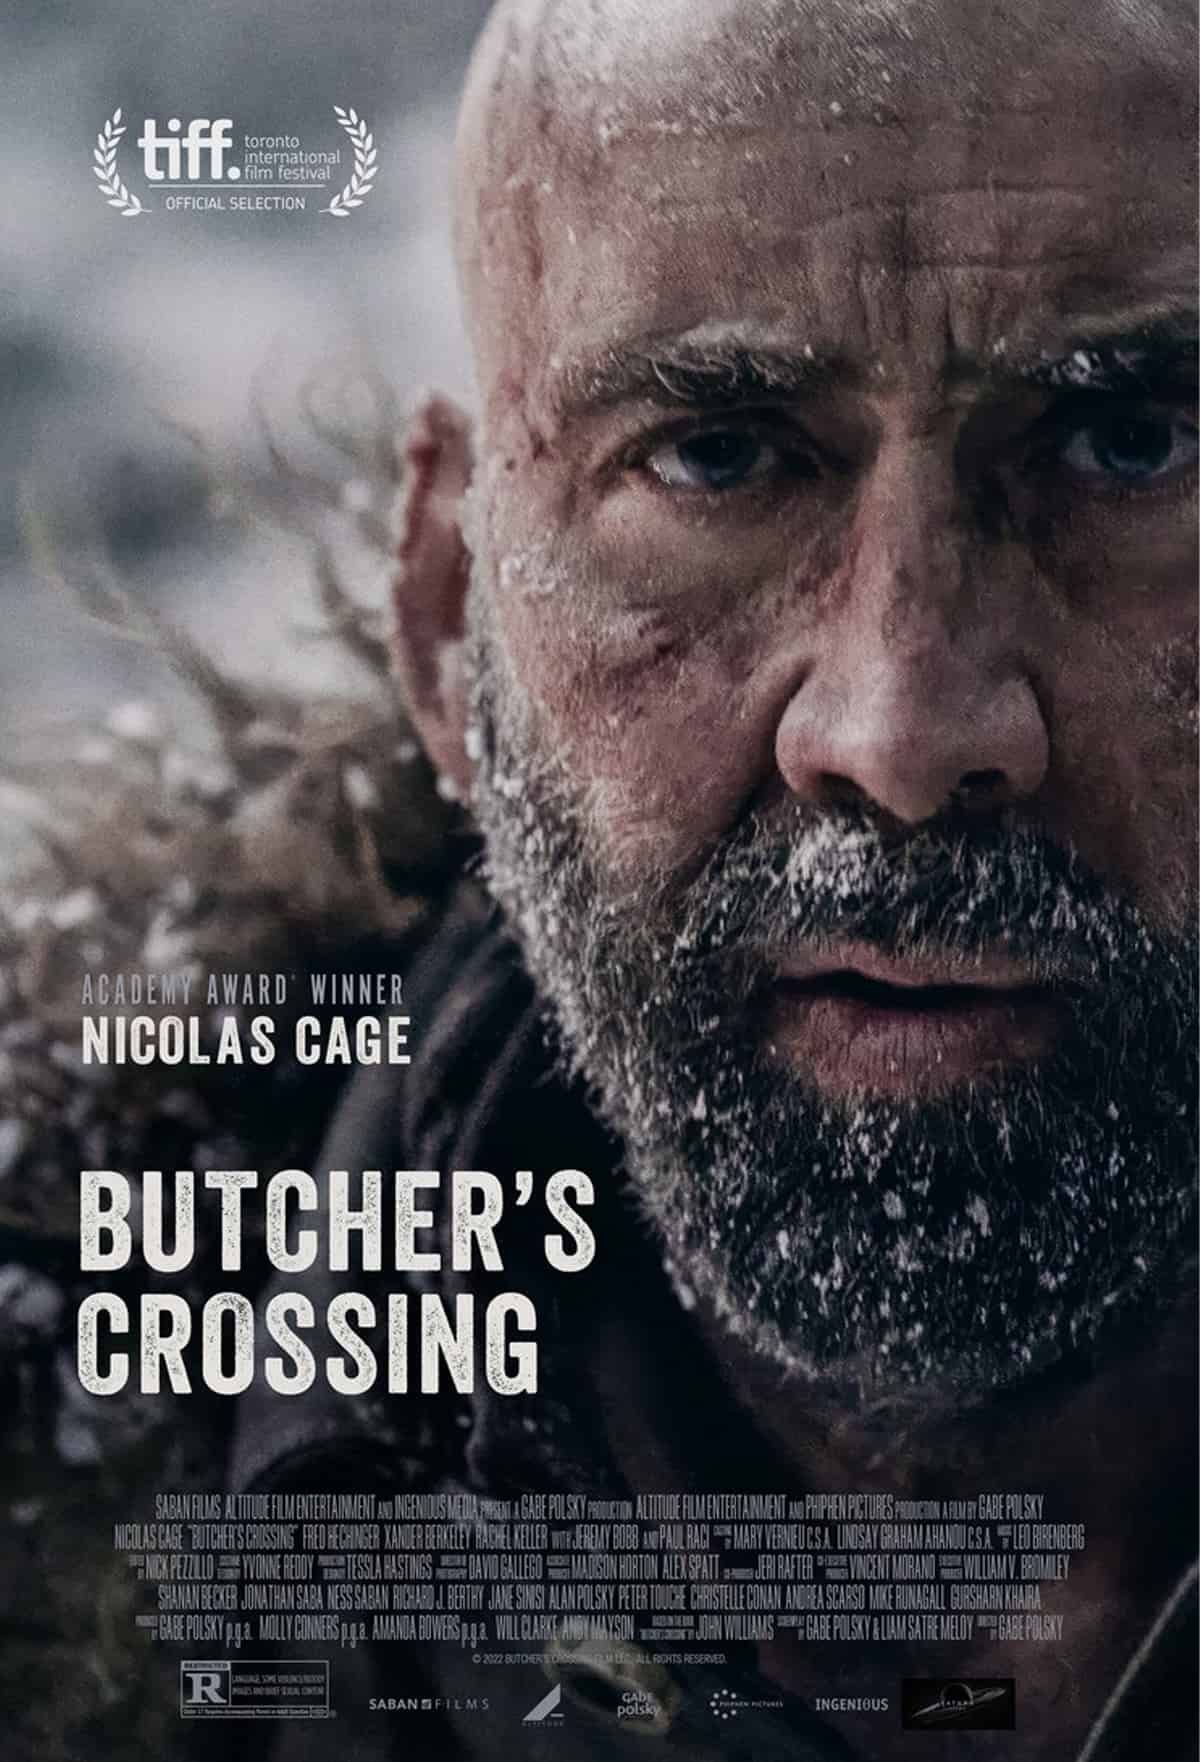 BUTCHER'S CROSSING POSTER IMAGE